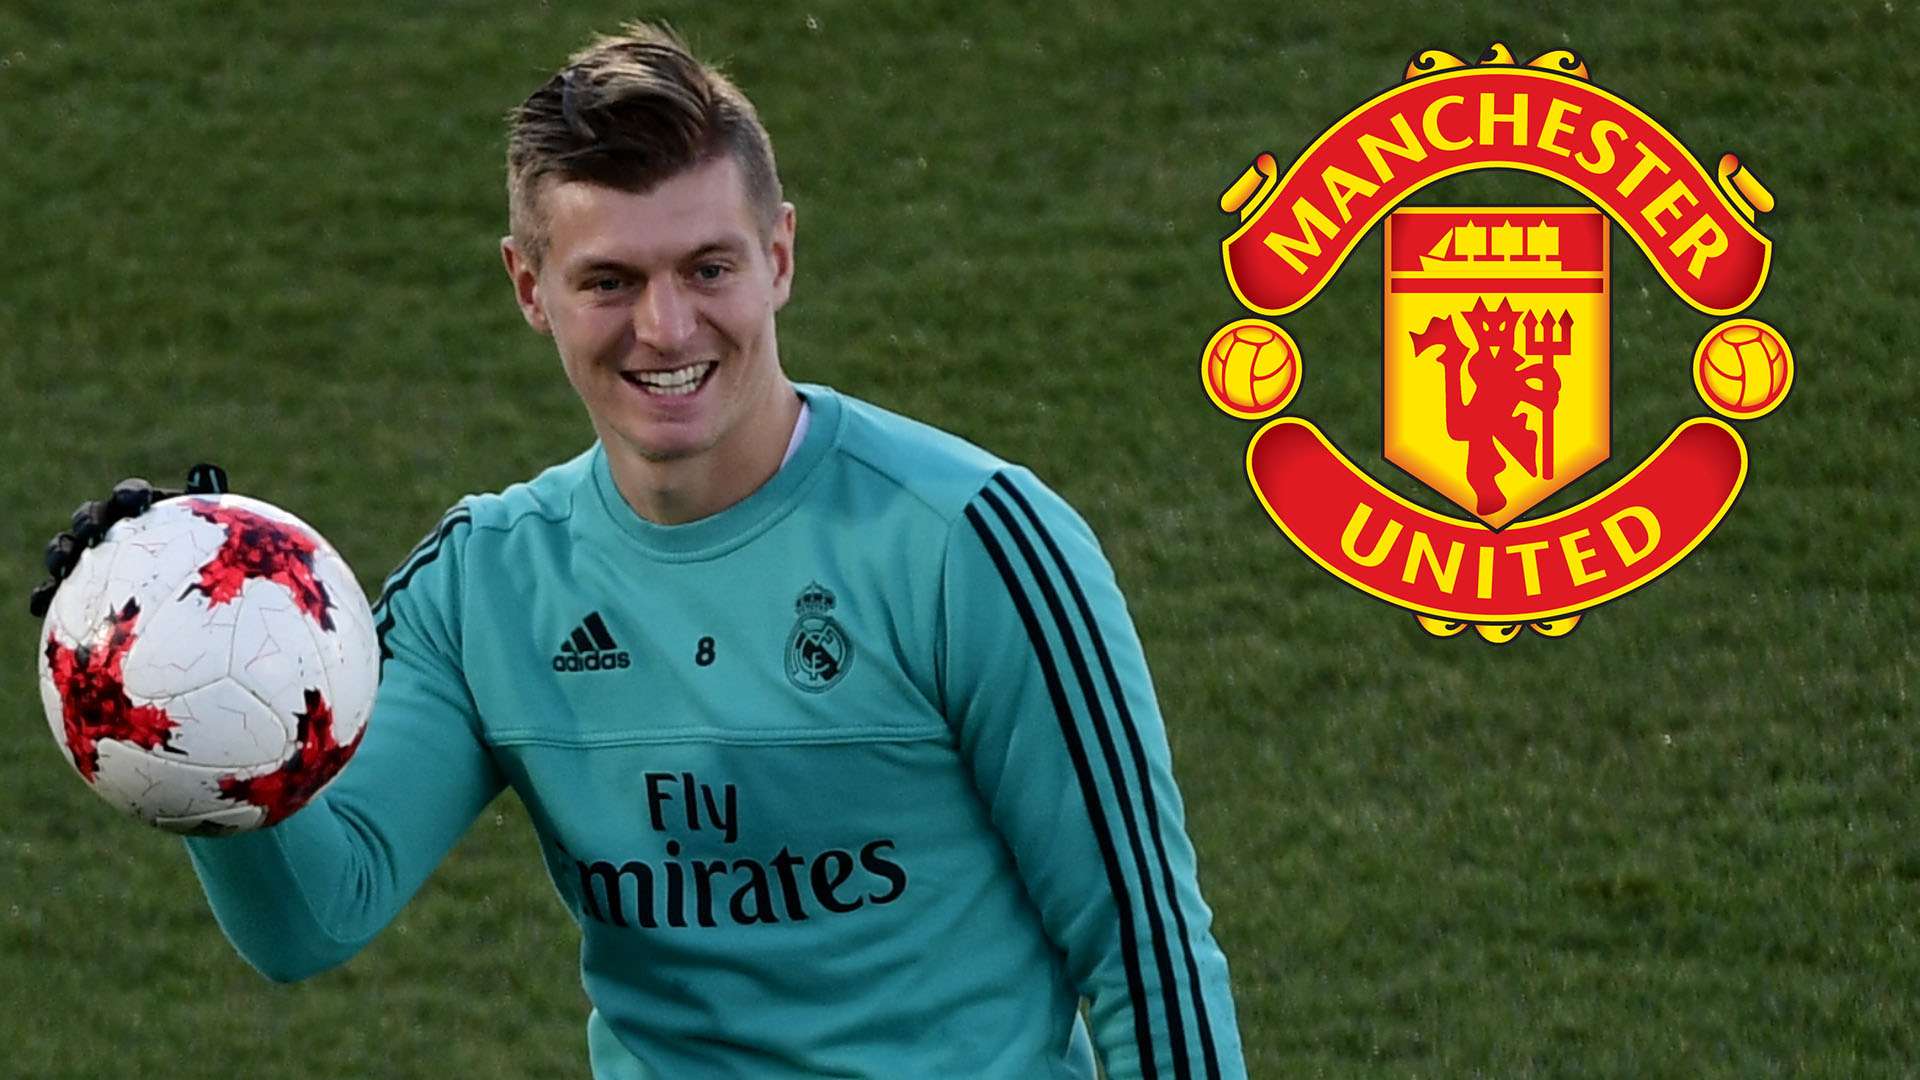 Toni Kroos to Manchester United?